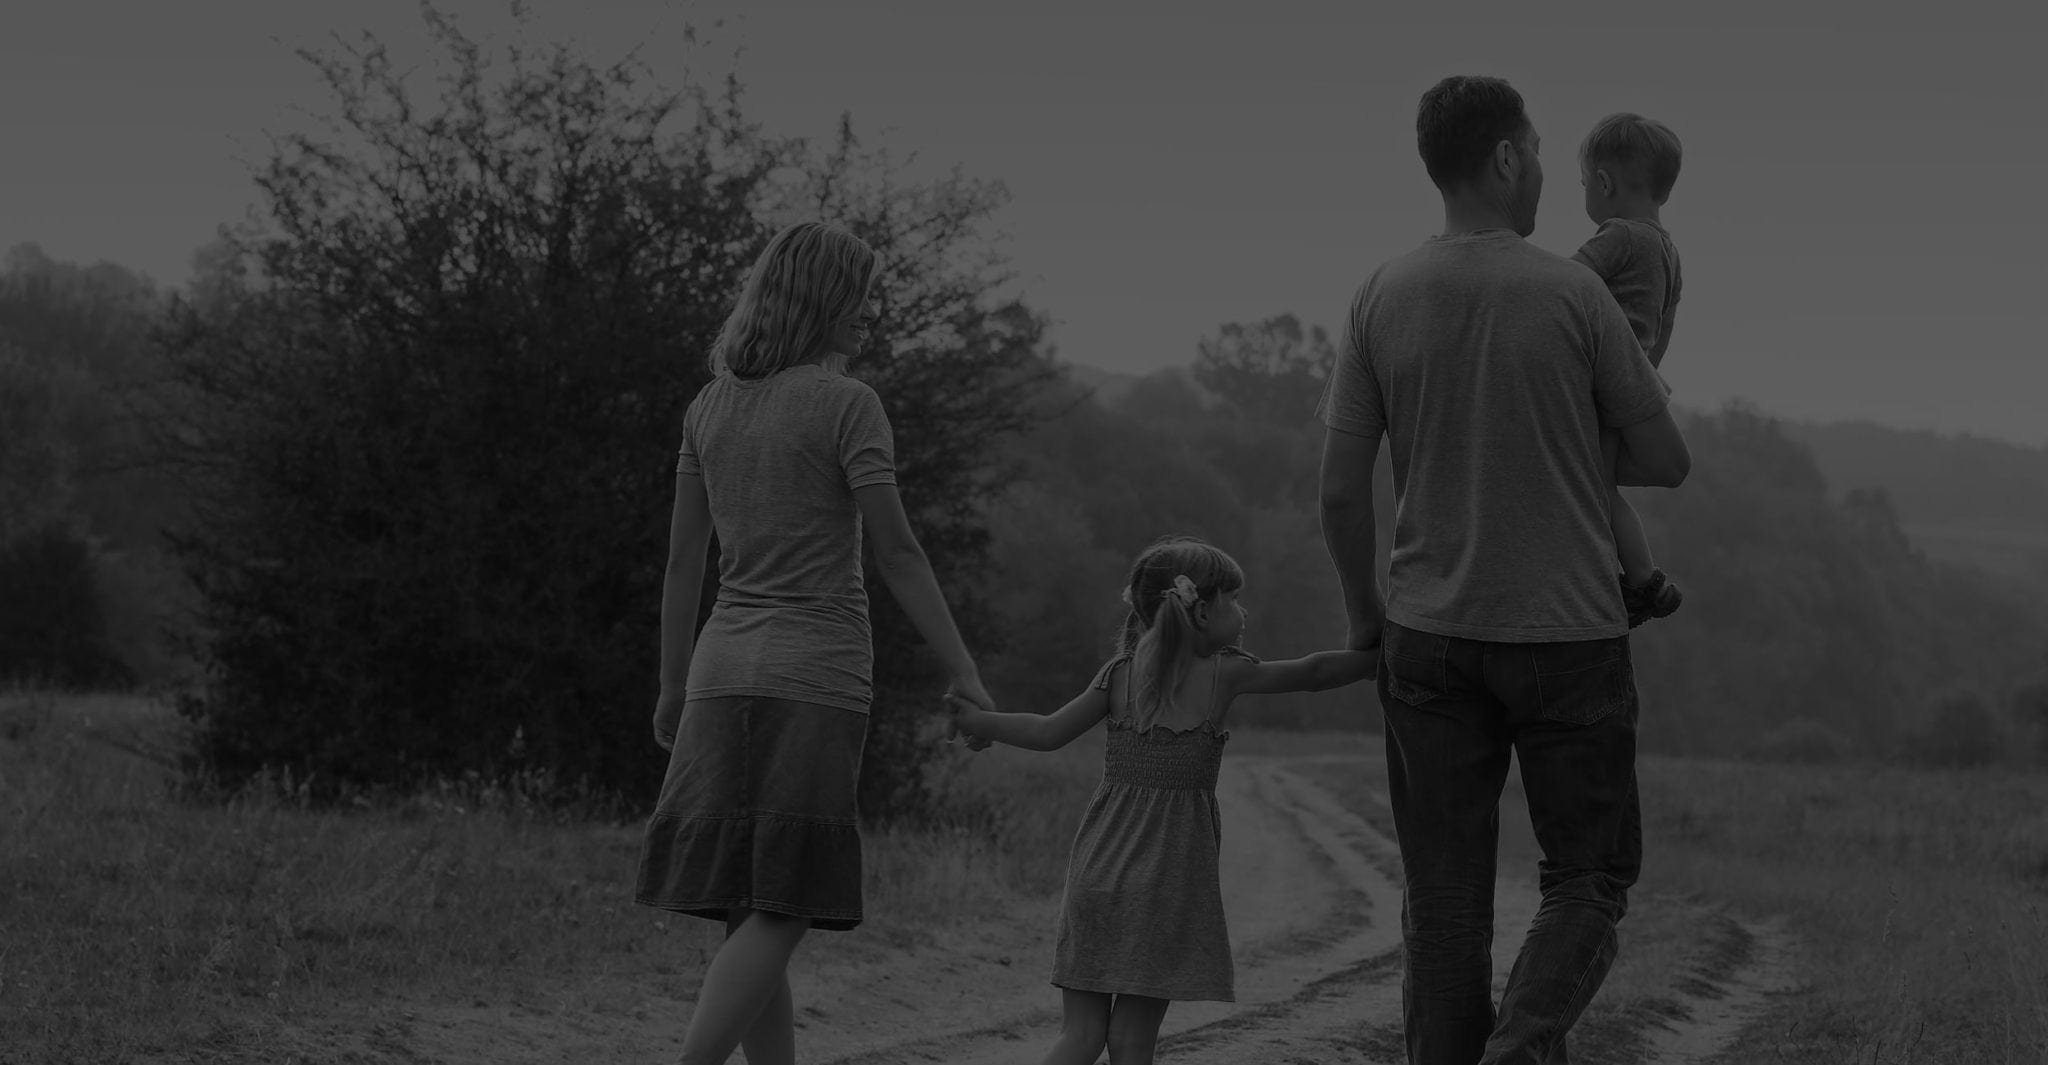 family law - family walking together